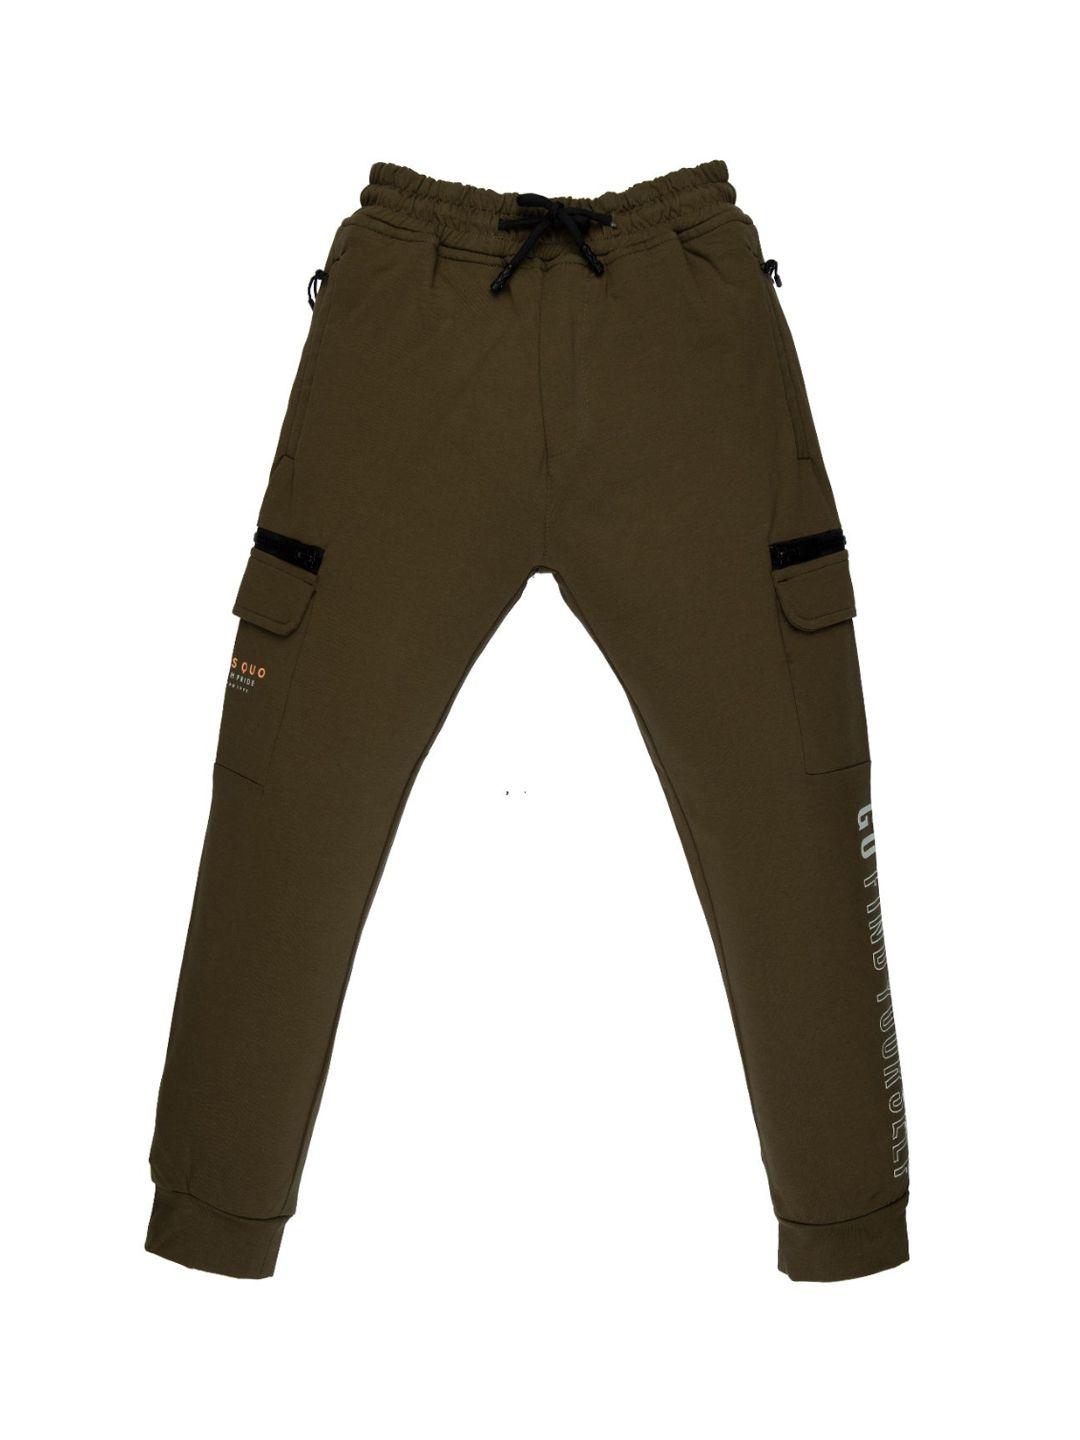 status quo boys olive-green solid regular fit cotton joggers